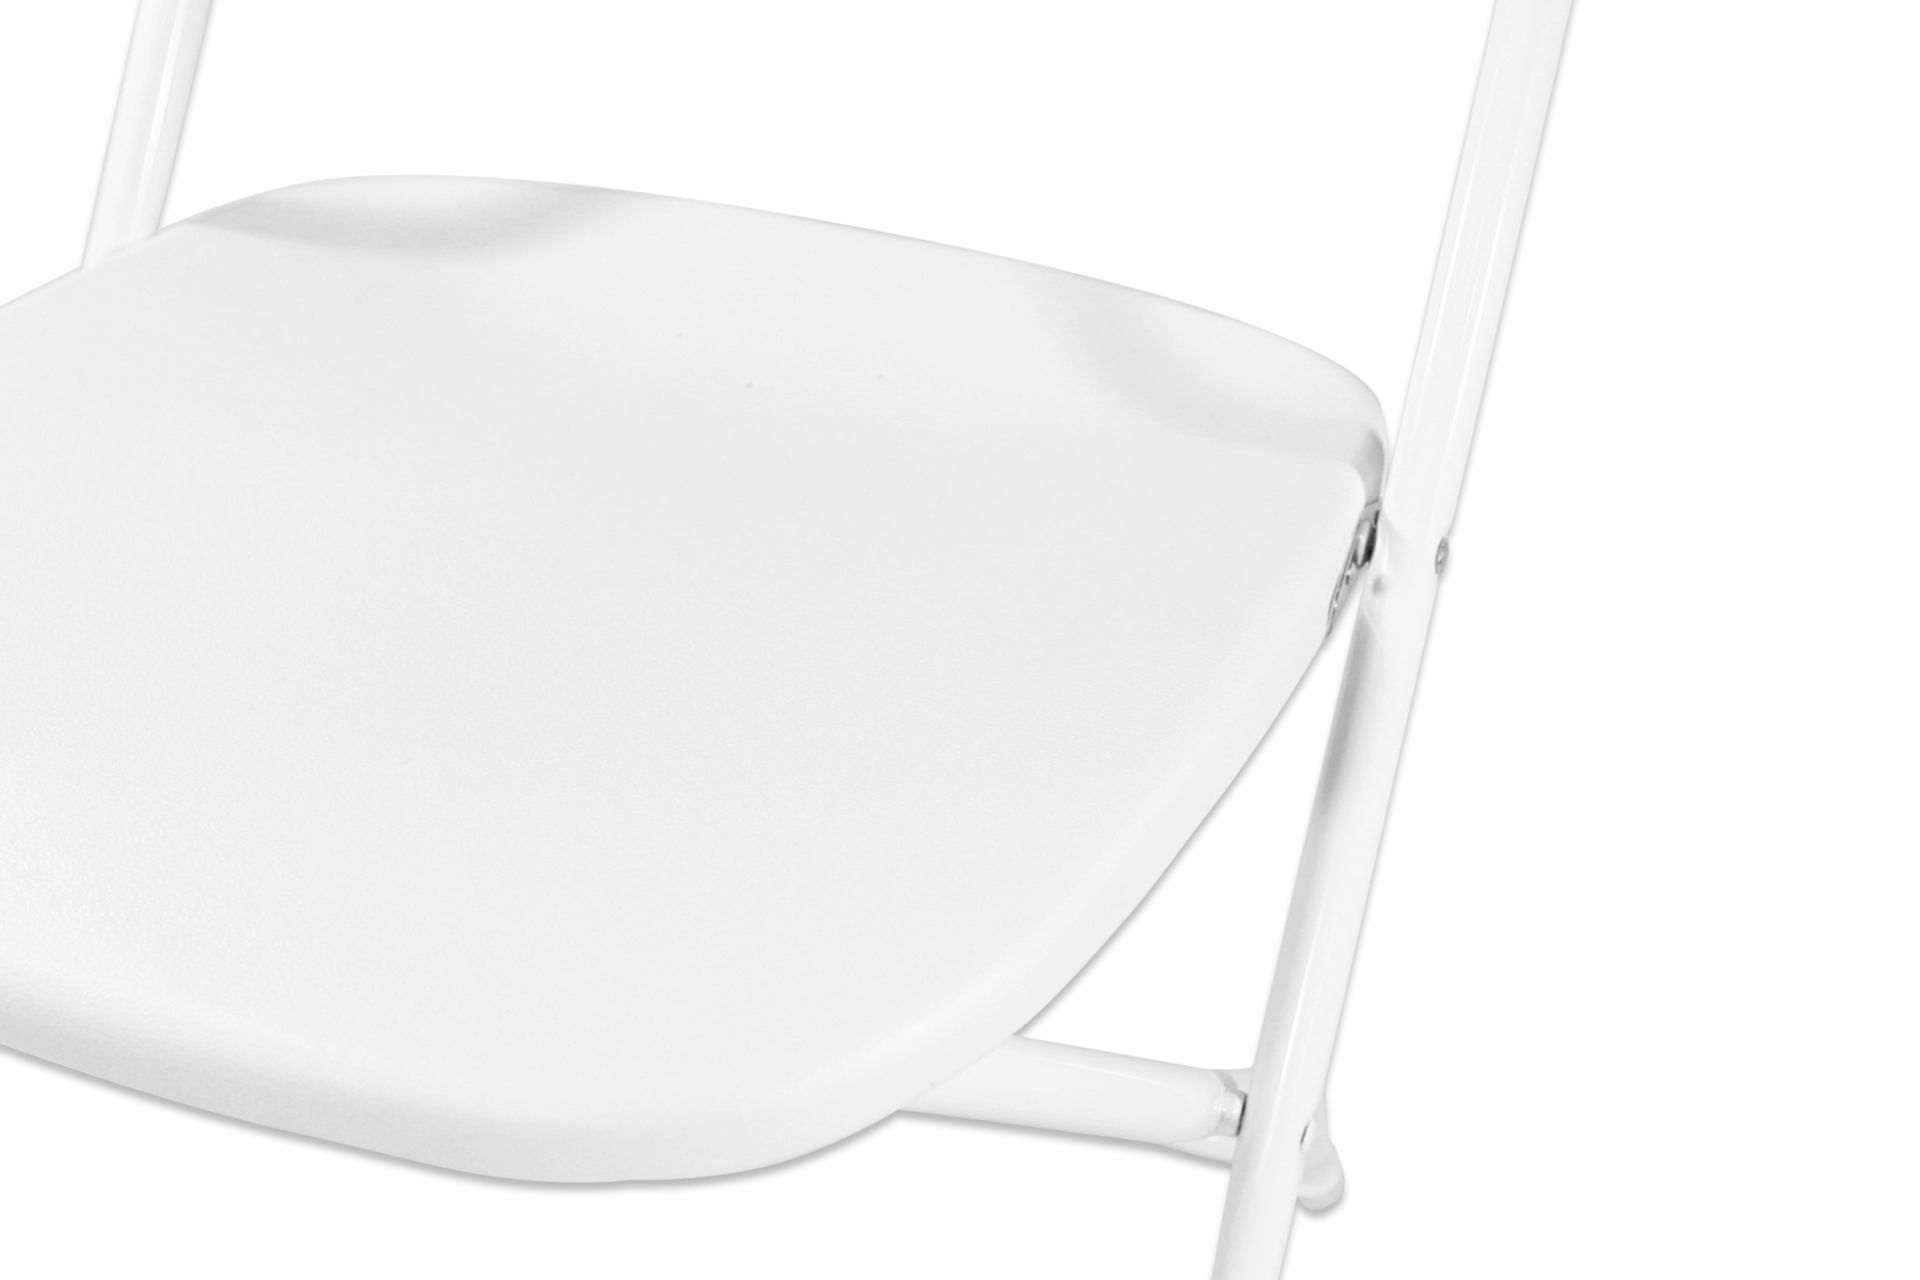 V *TRADE QTY* Grade A Folding Plastic Chair - White X150 YOUR BID PRICE TO BE MULTIPLIED BY ONE - Image 5 of 6